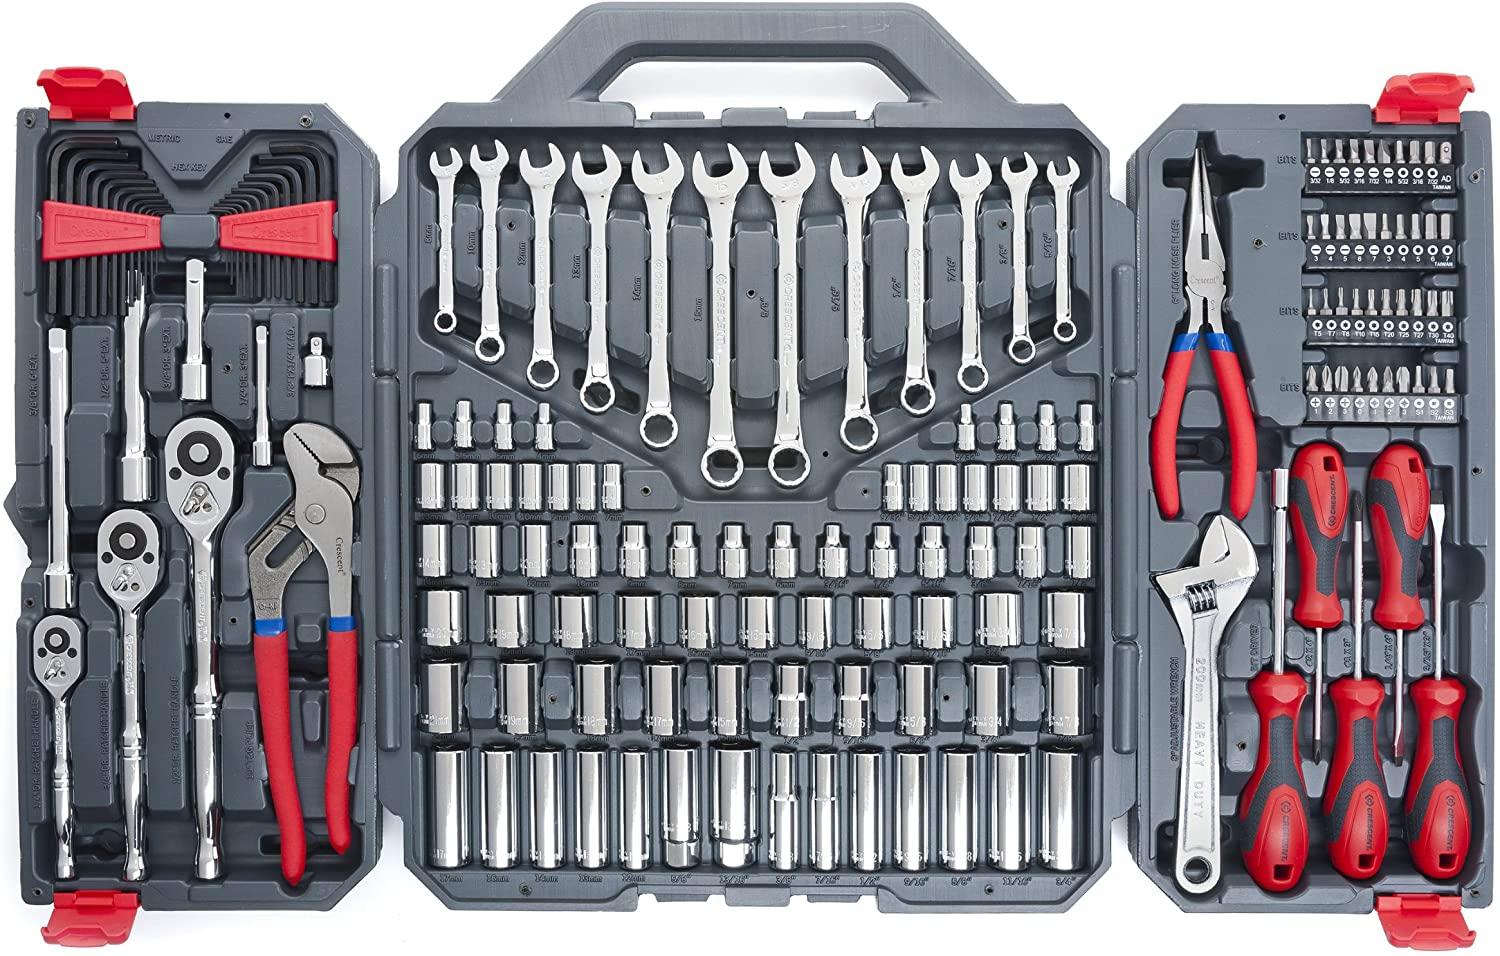 Crescent 170 Piece General Purpose Tool Set for $69.99 Shipped